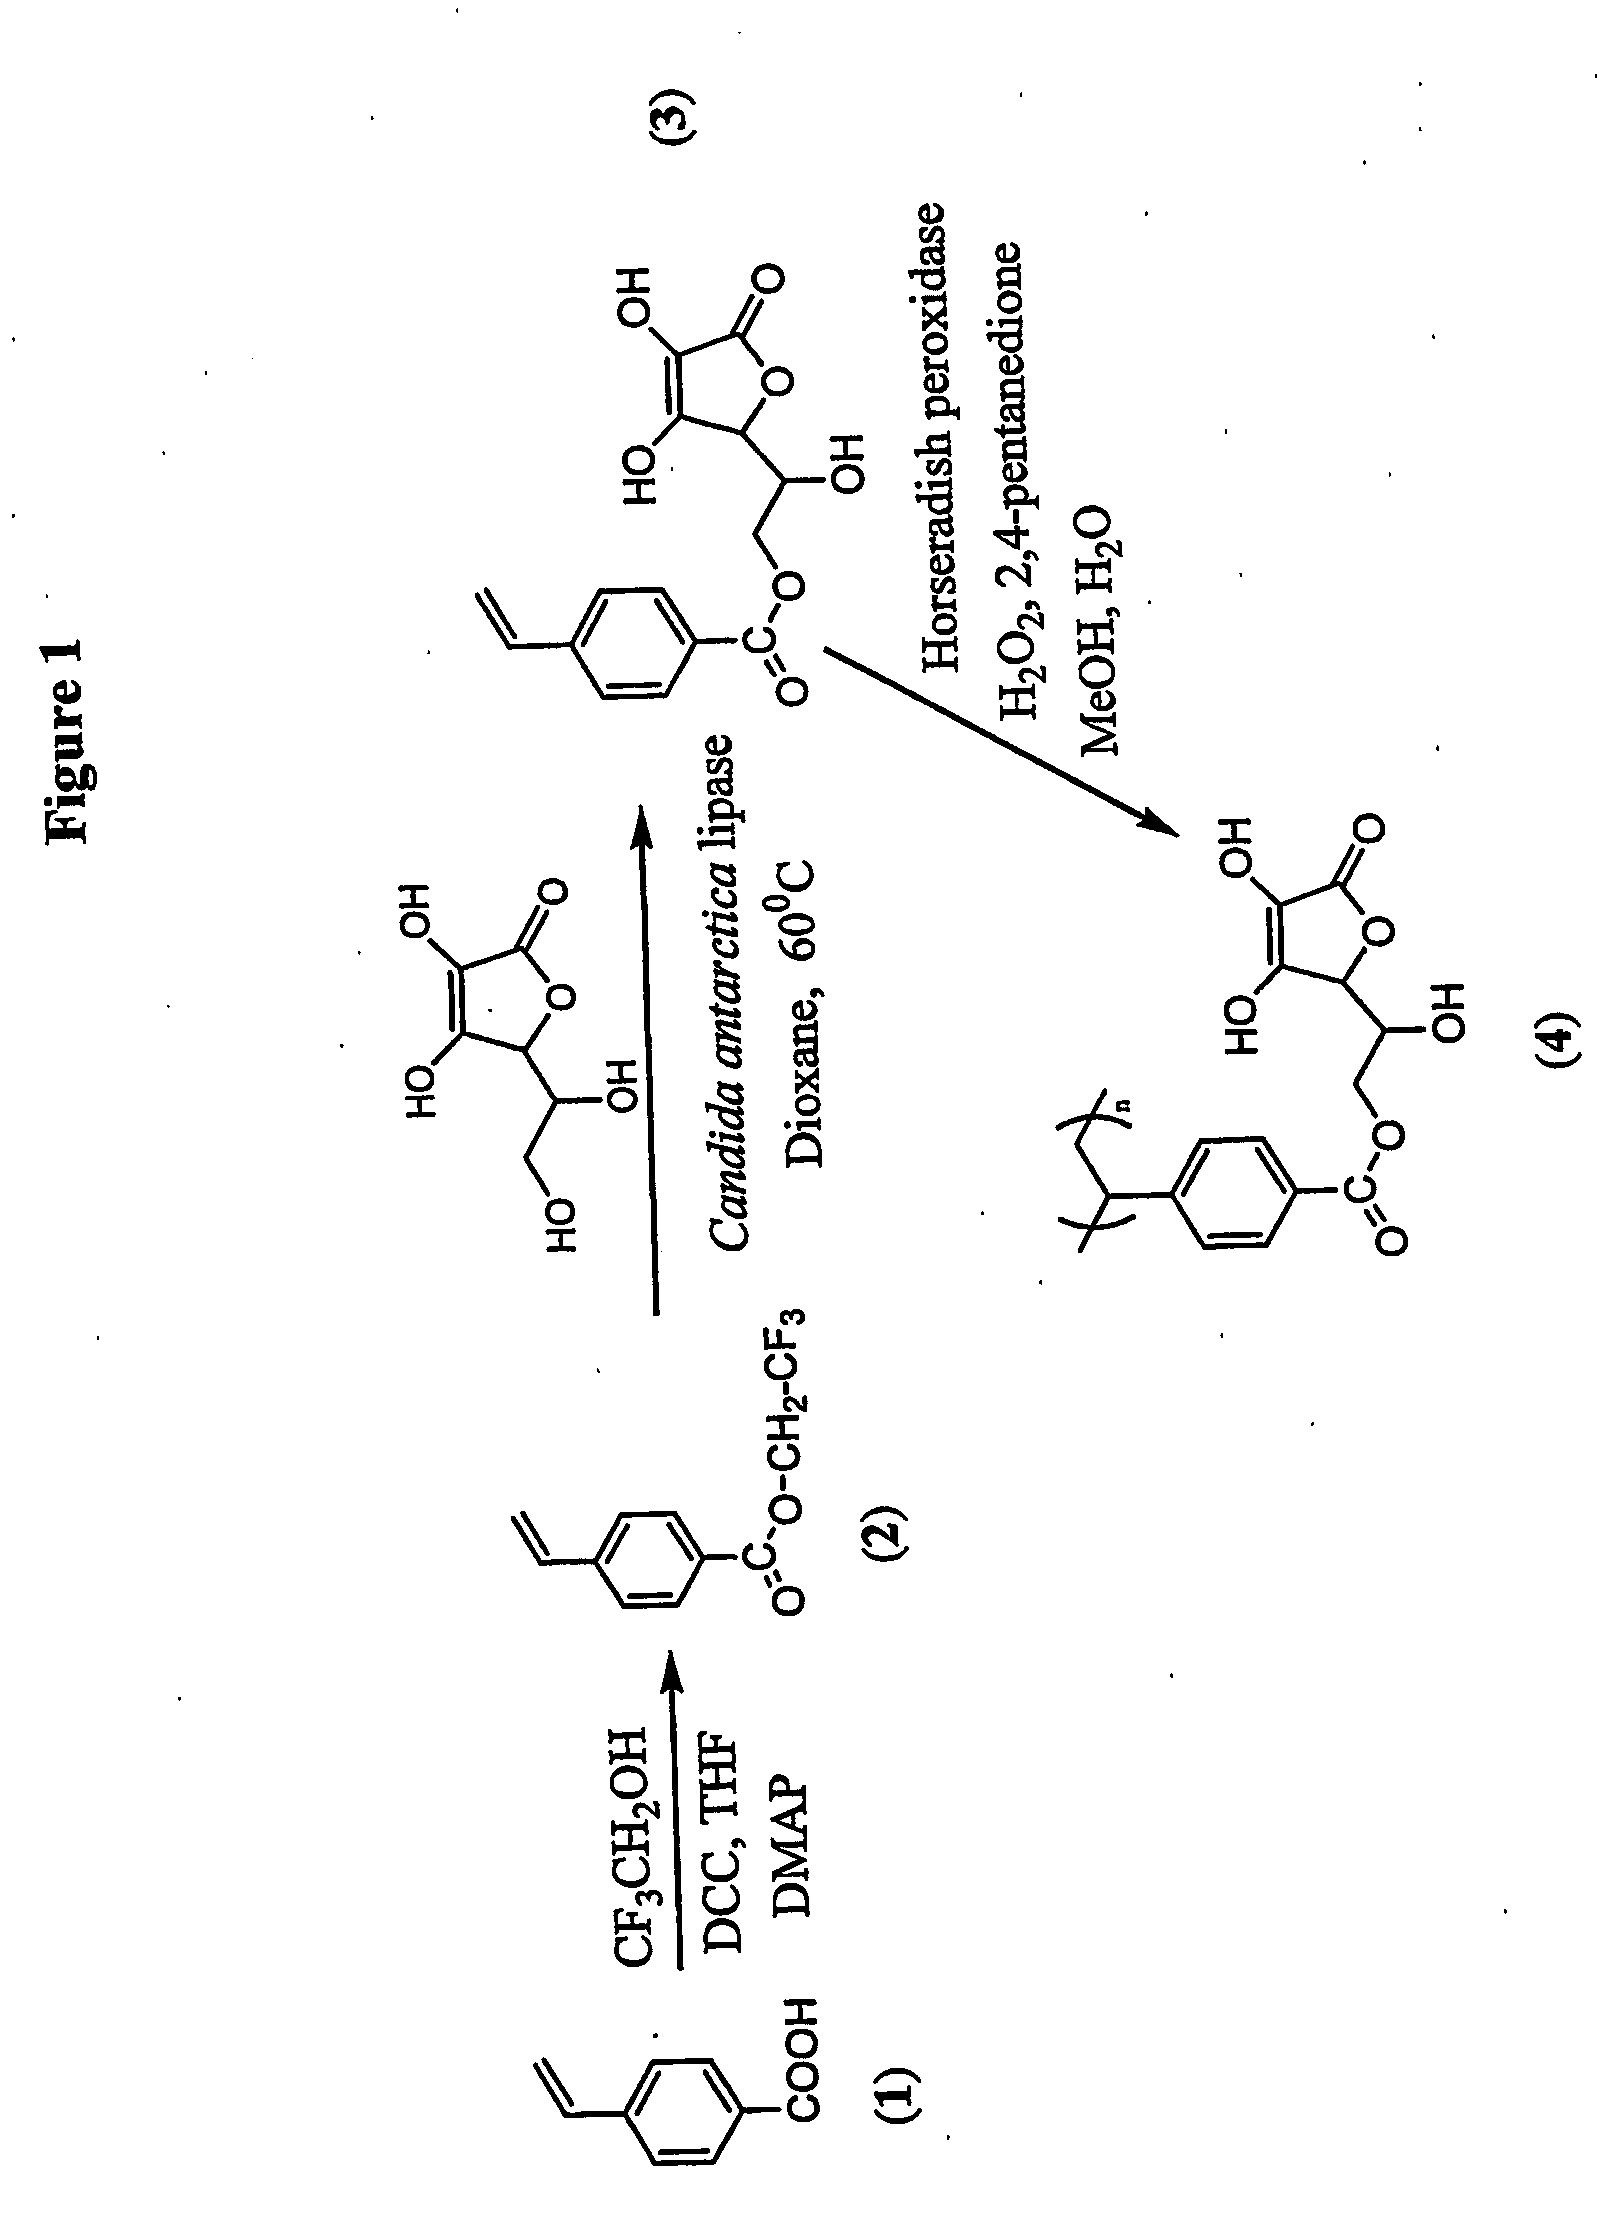 Antioxidant-functionalized polymers